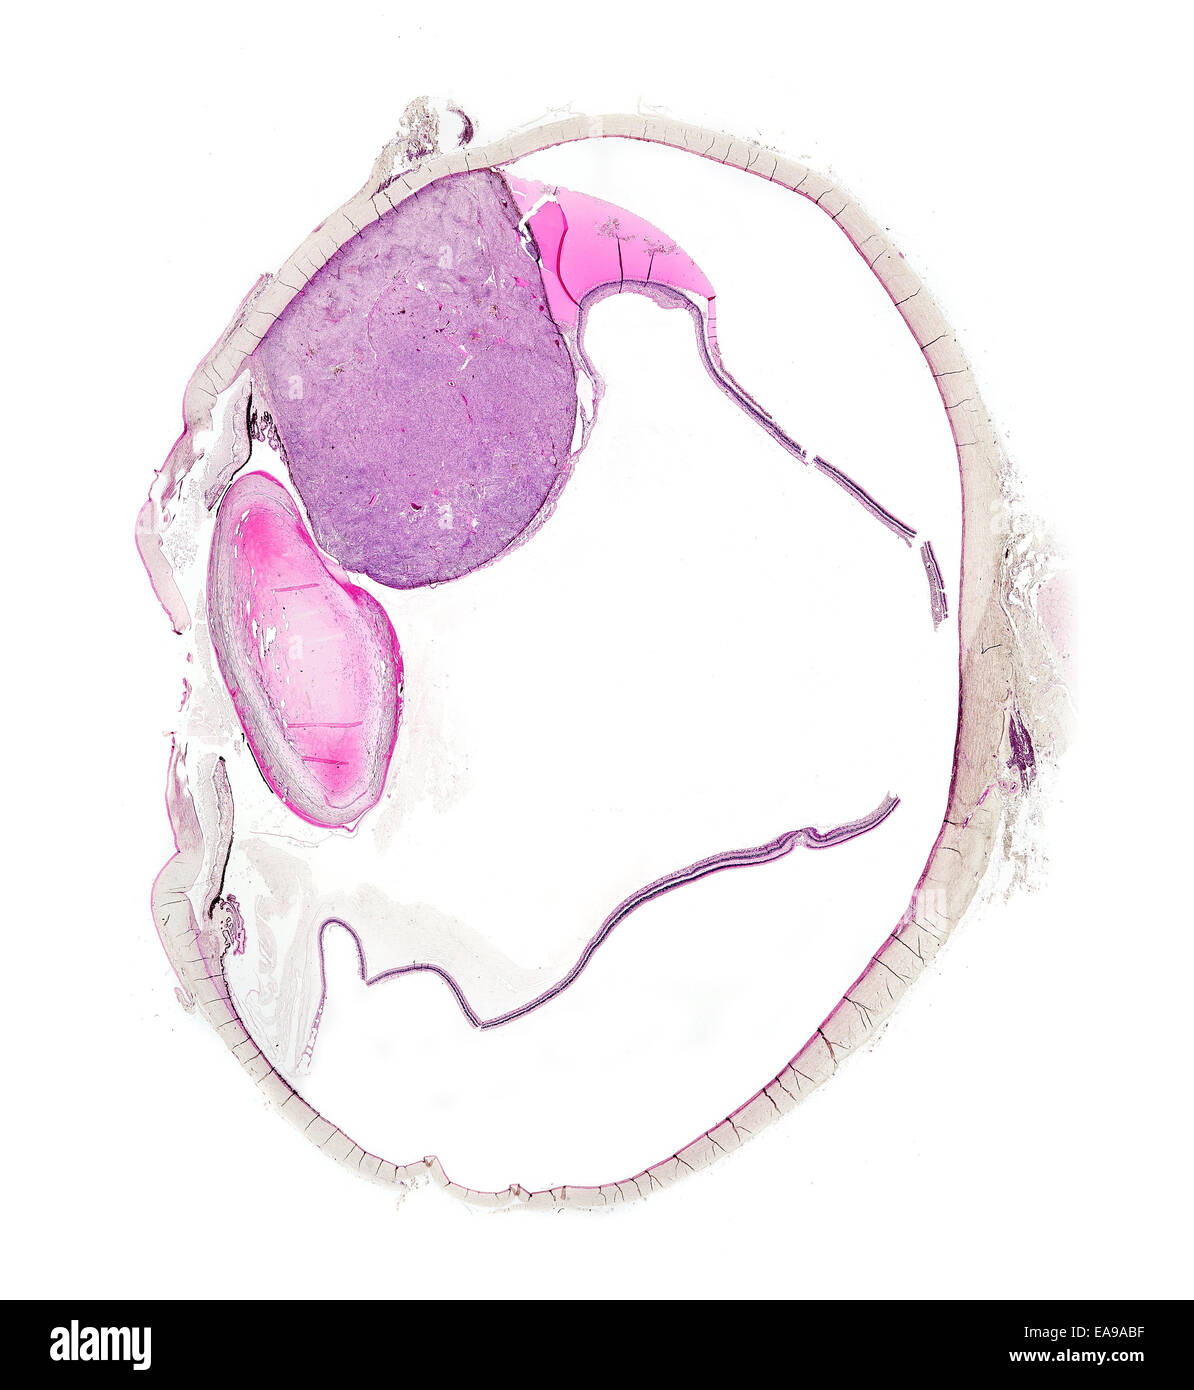 Human eye section showing structure with diseased melanotic tumor (large pink area) brightfield photomicrograph Stock Photo